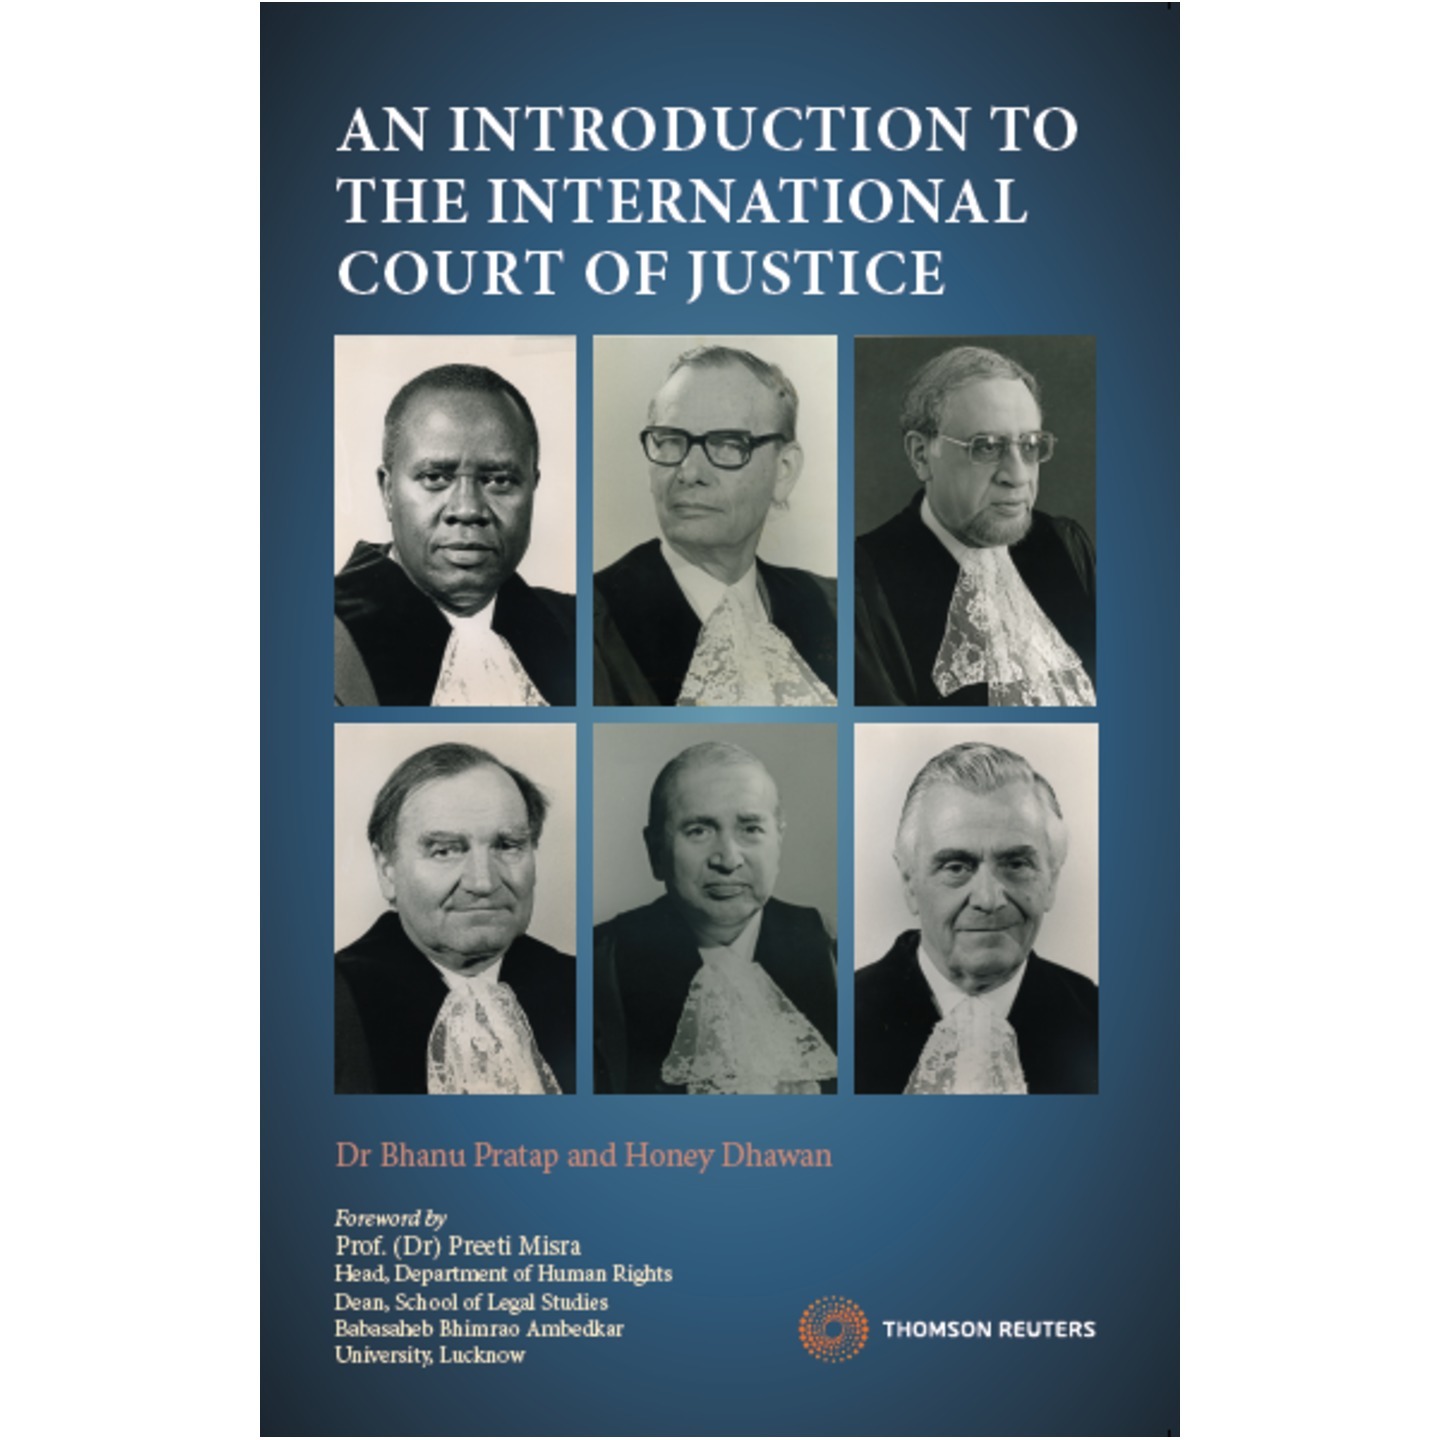 An Introduction to the International Court of Justice